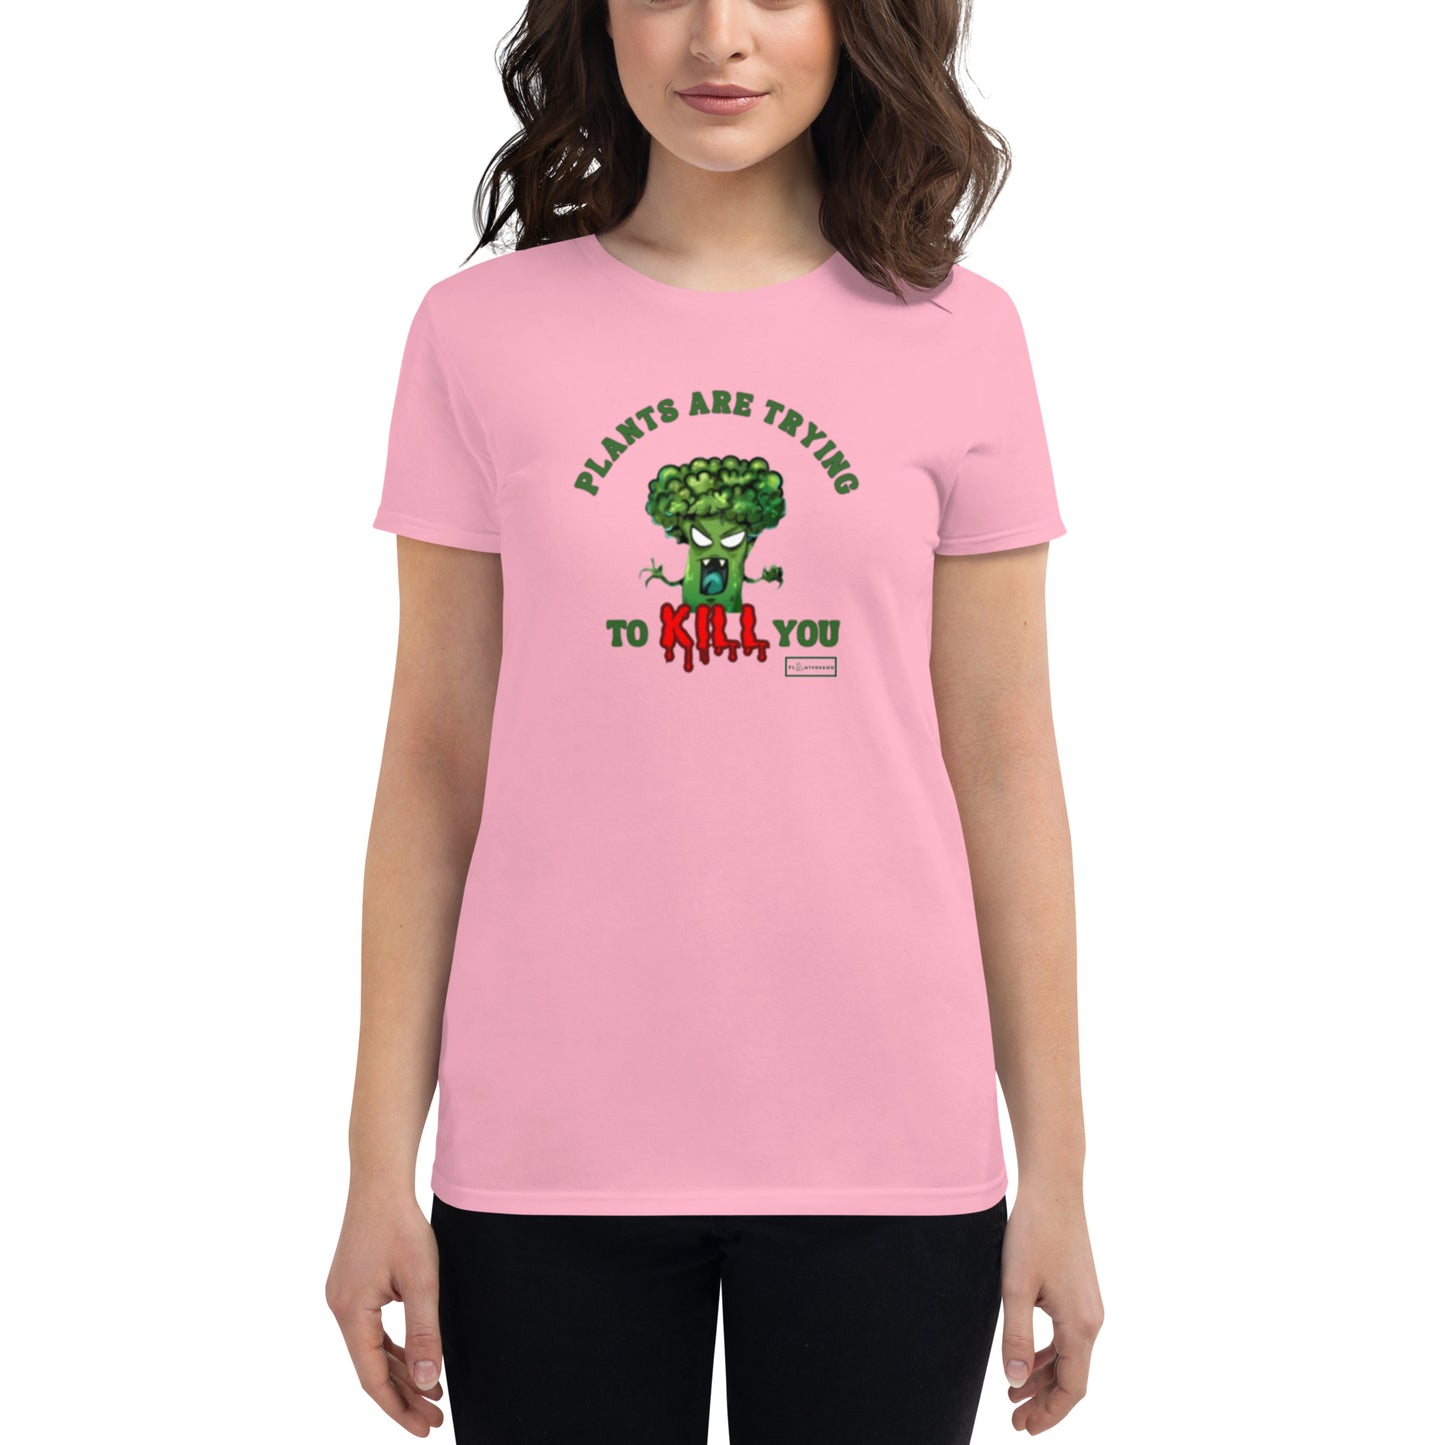 Plants Are Trying to K*ll You Women's Fitted T-shirt